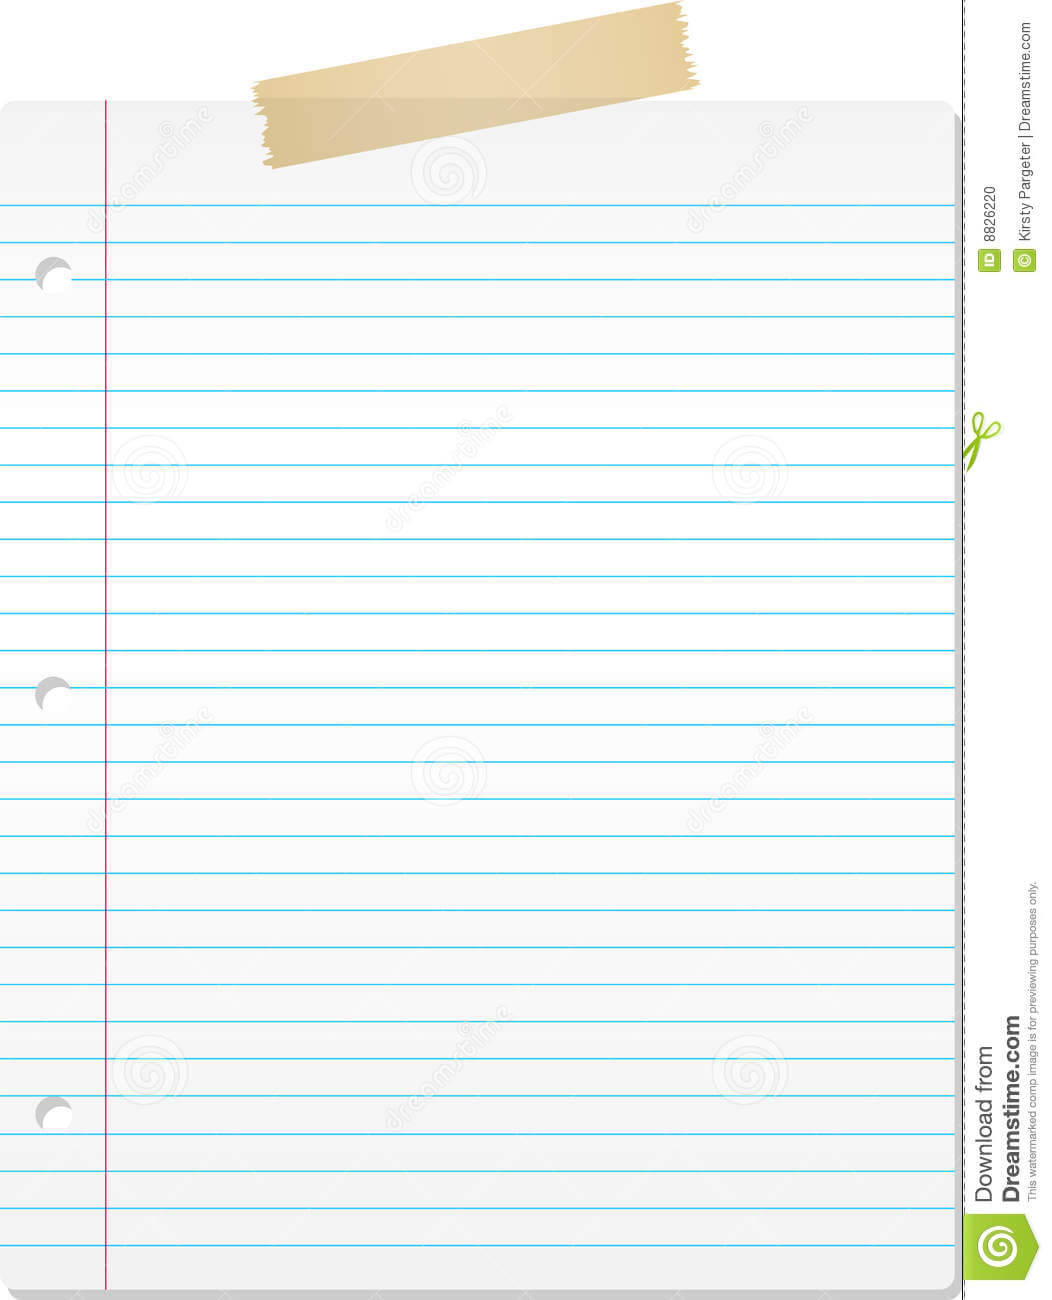 026 Microsoft Word Lined Paper Template Ideas Fantastic For Within Notebook Paper Template For Word 2010